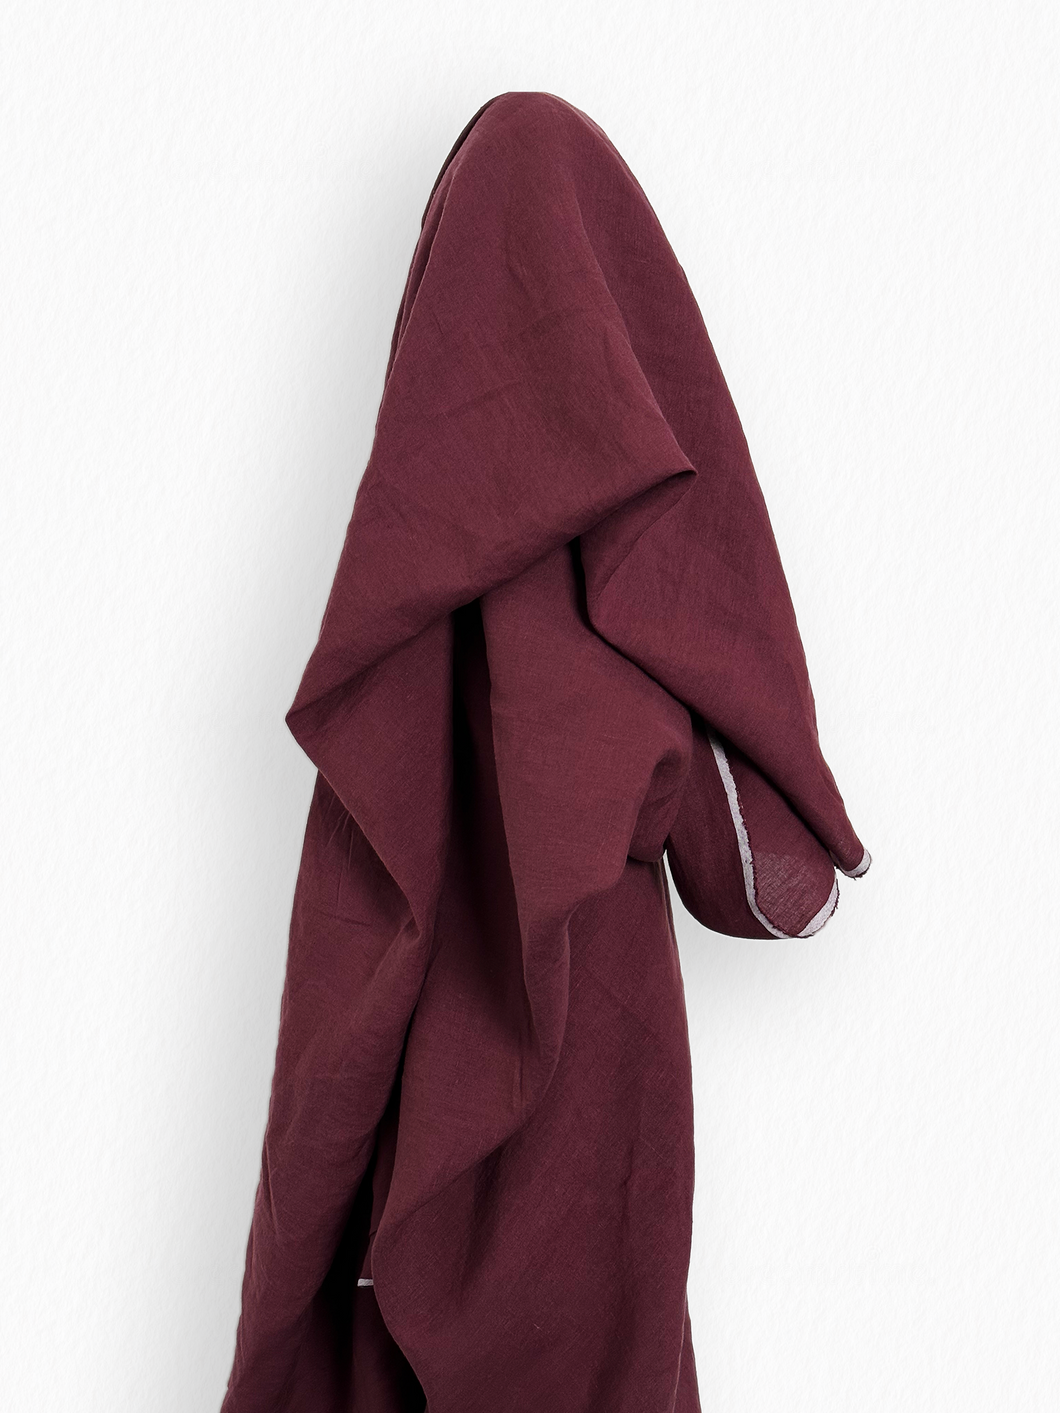 Wine Vintage Finish, Piece Washed 100% Linen 180 gsm $49 pm